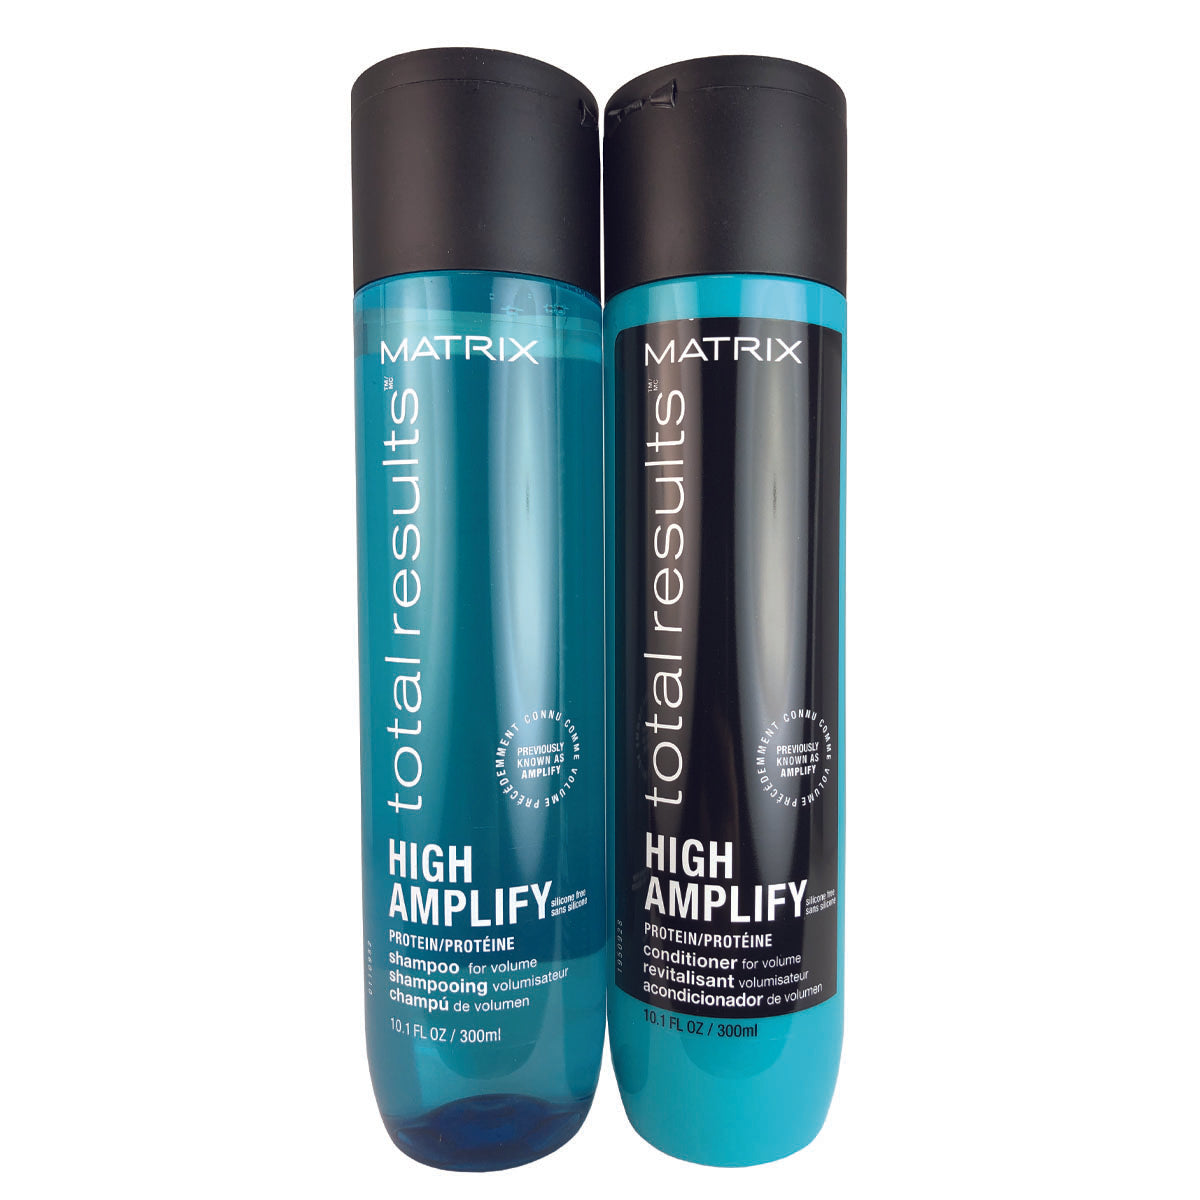 Matrix Total Results High Amplify Duo Shampoo + Conditioner 10.1 oz. Each